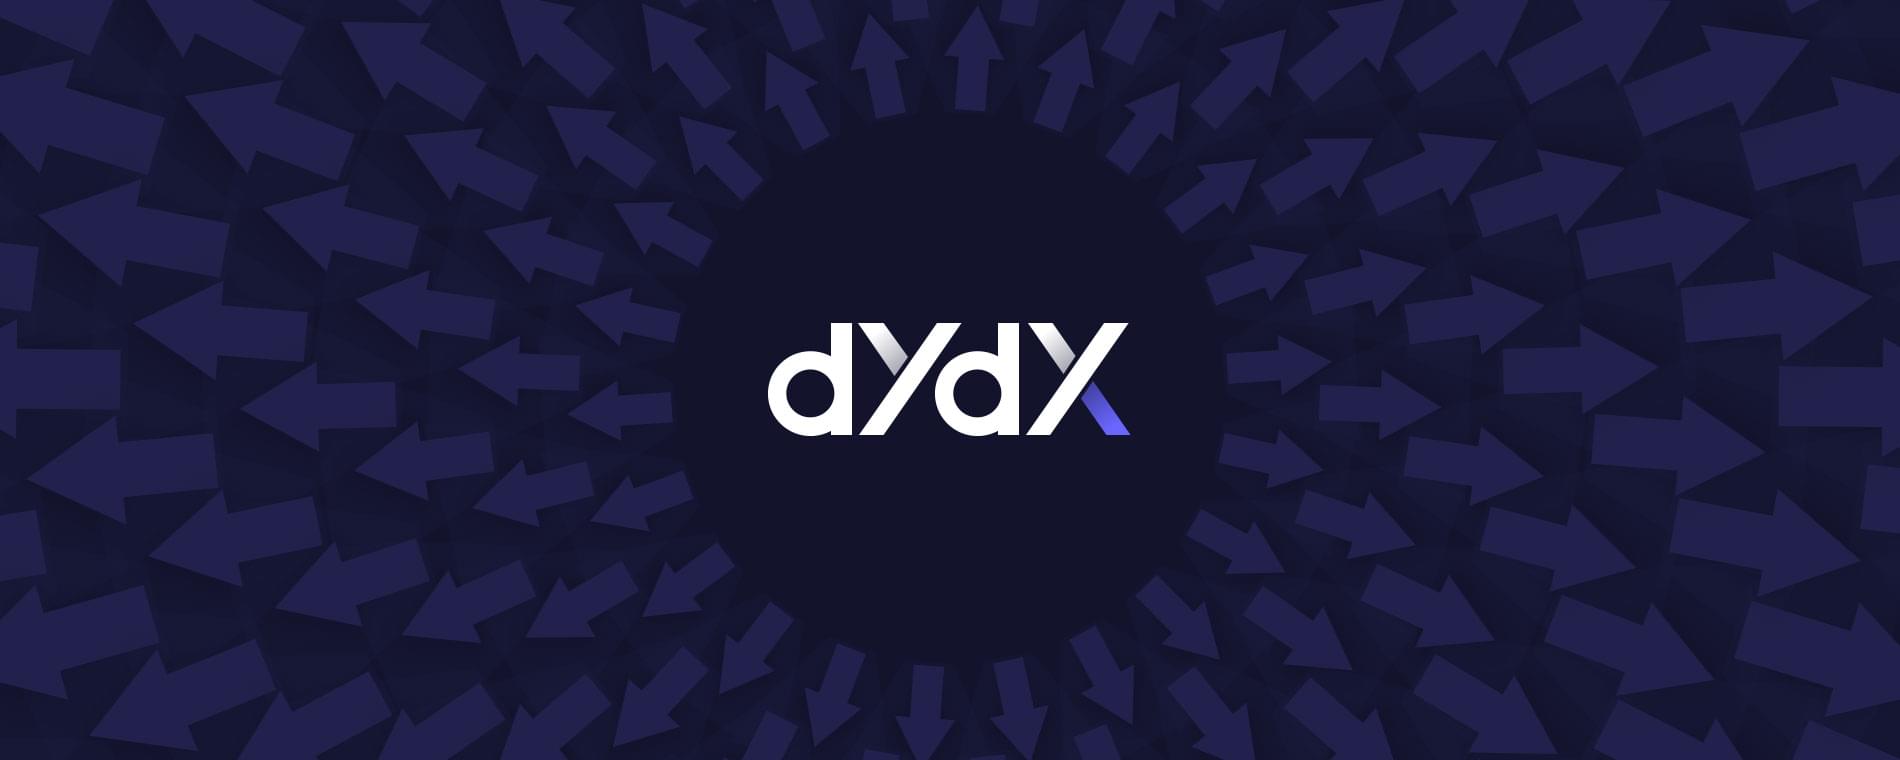 dYdX moves from Ethereum to Cosmos to achieve full decentralization